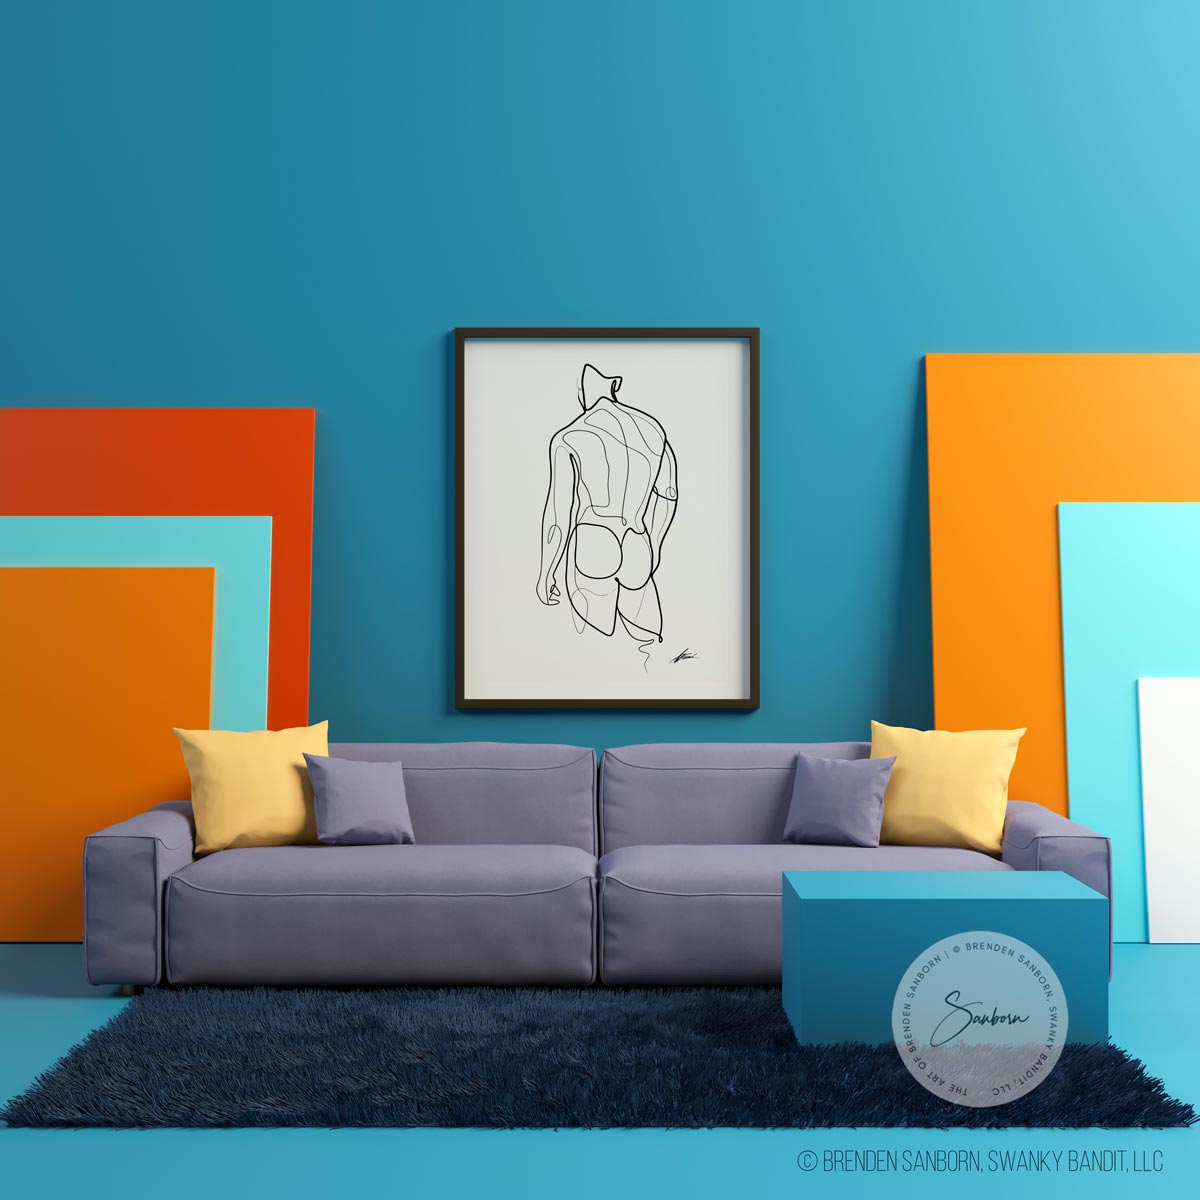 Contour of Contemplation - Solo Male Figure from Behind - Giclee Art Print